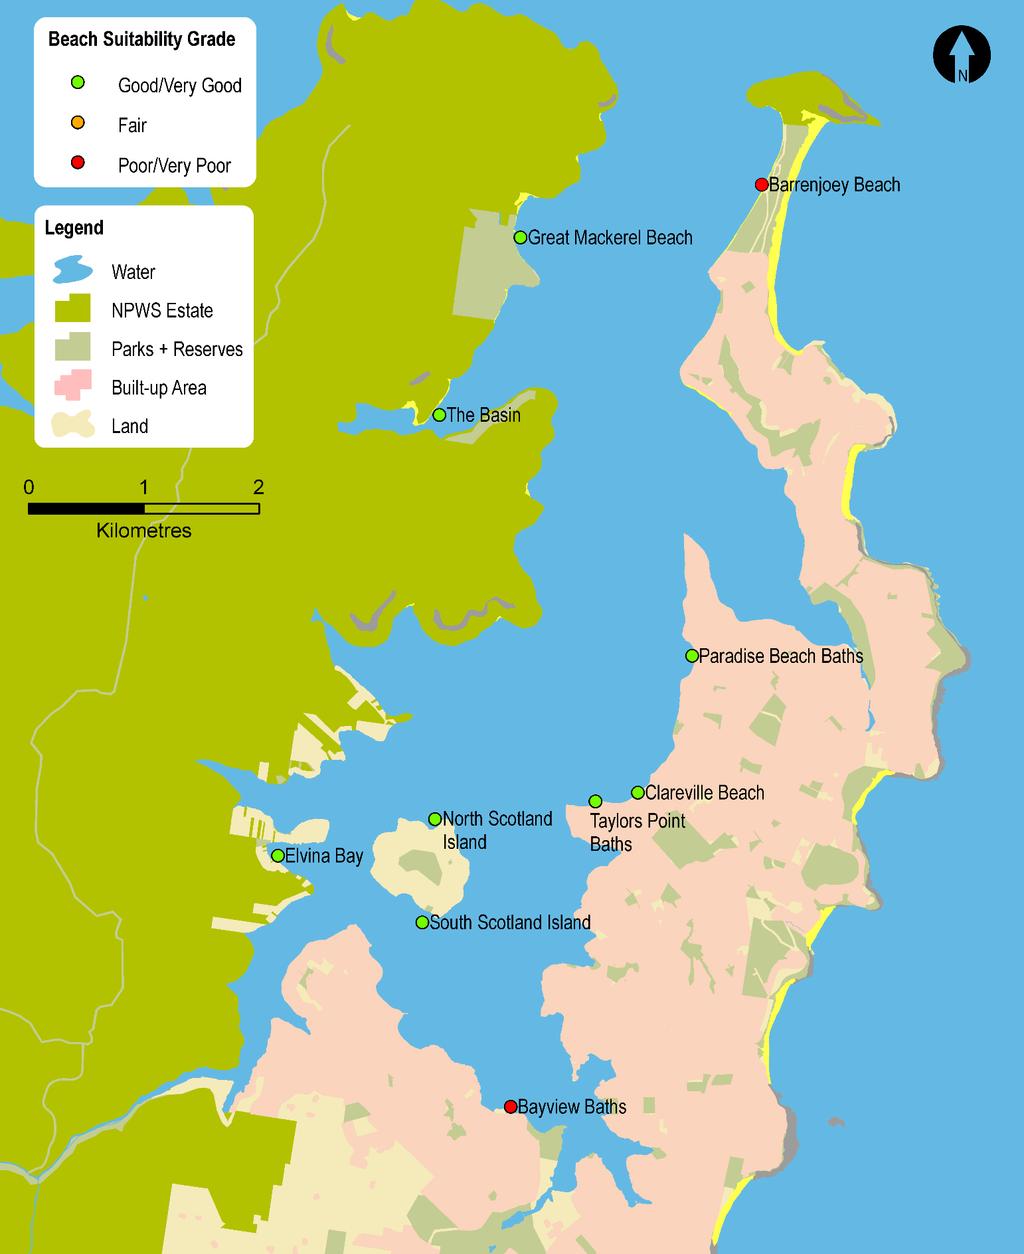 Sydney Region Northern Sydney (Pittwater to Manly) Sampling sites and